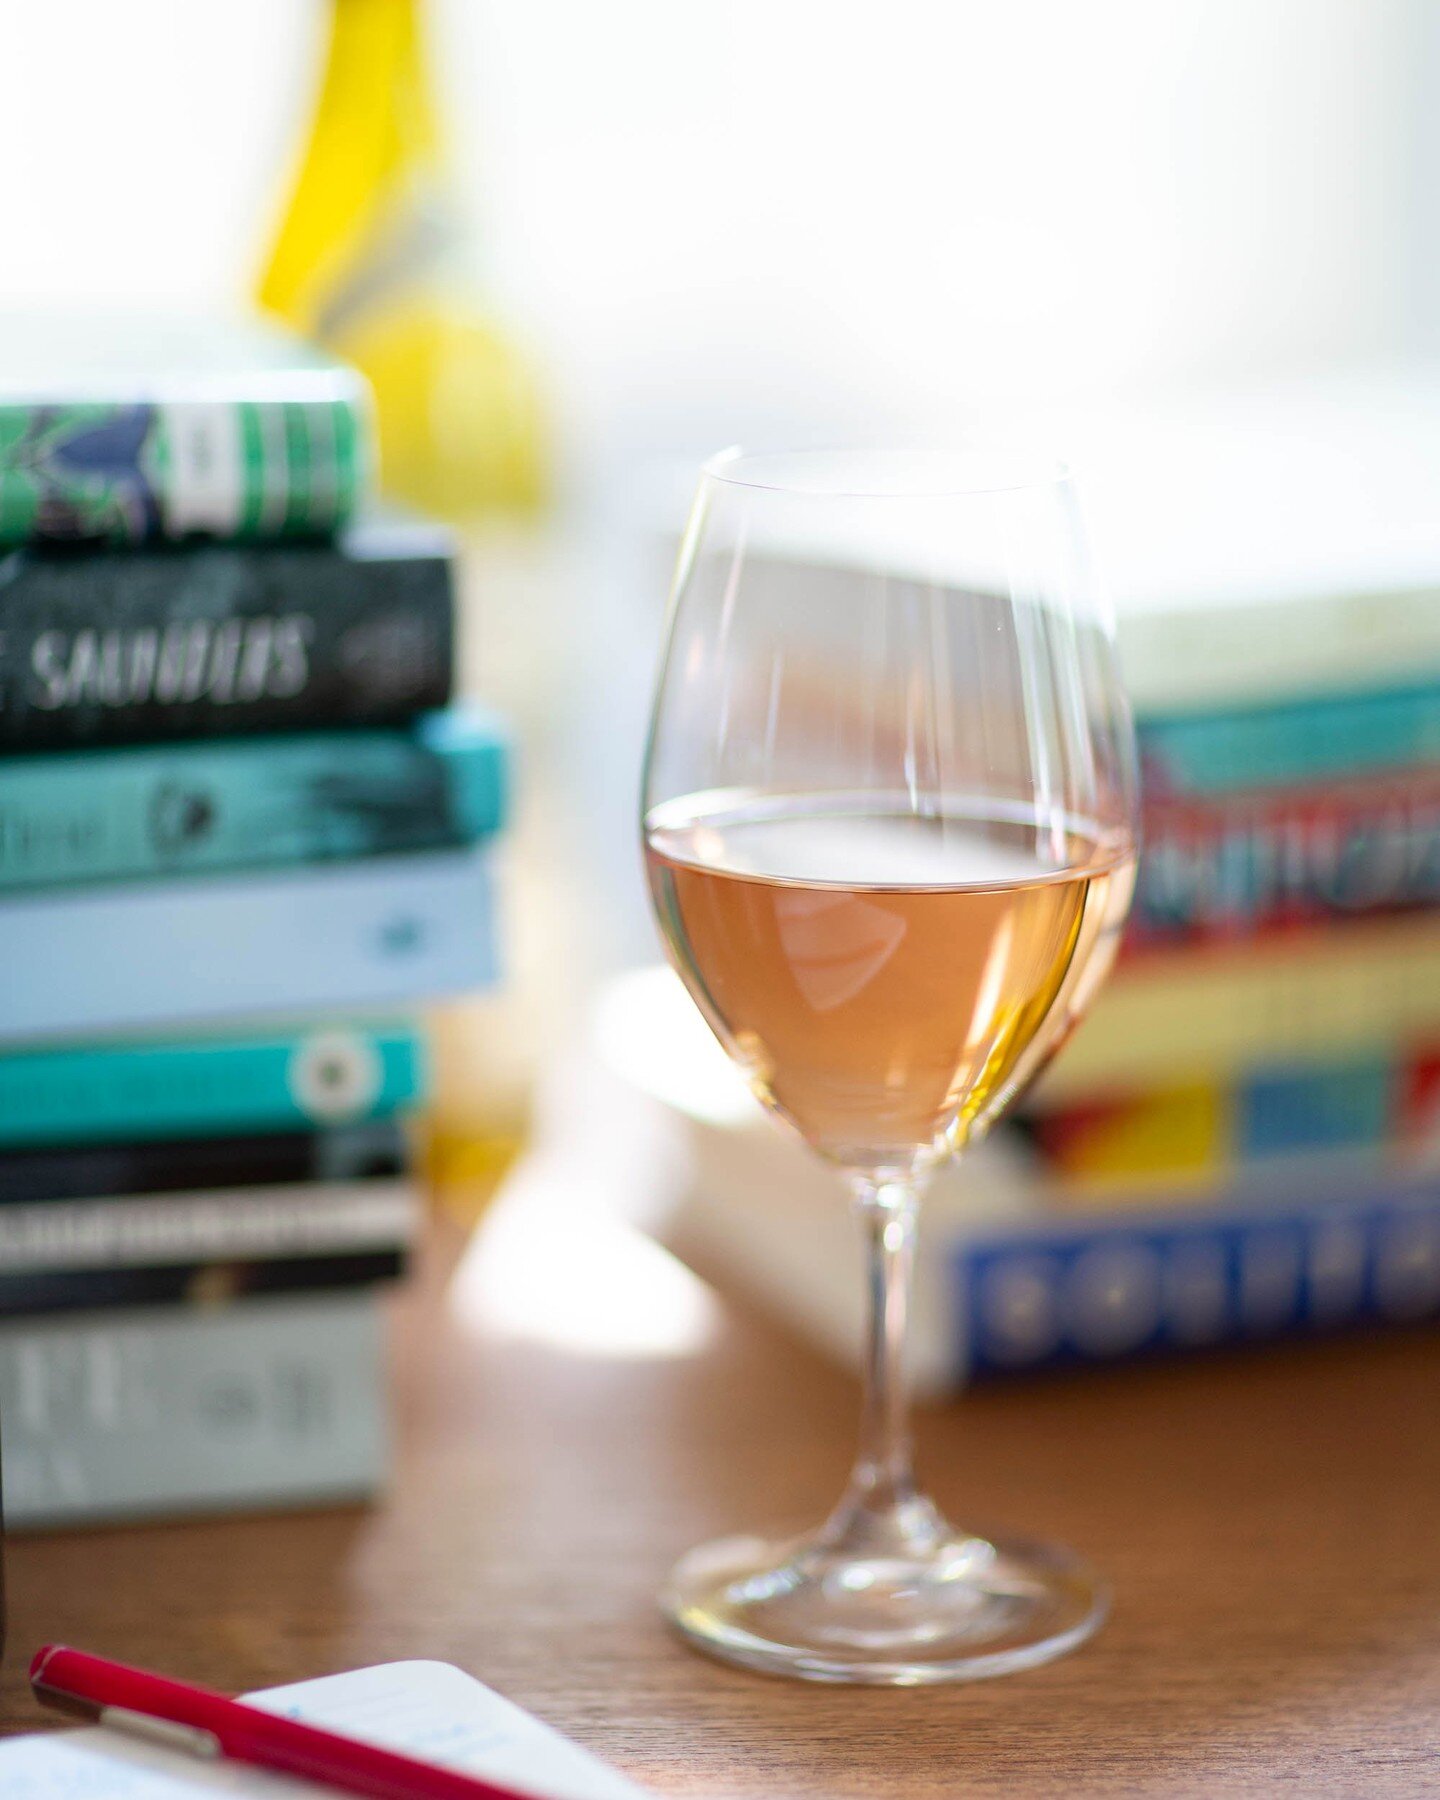 Just in time for summer reading, I&rsquo;m launching a new project called Bookworm, a blog where I pair fantastic books with delicious wine. Each month I&rsquo;ll post a book review accompanied by complete tasting notes for a wine that I think pairs 